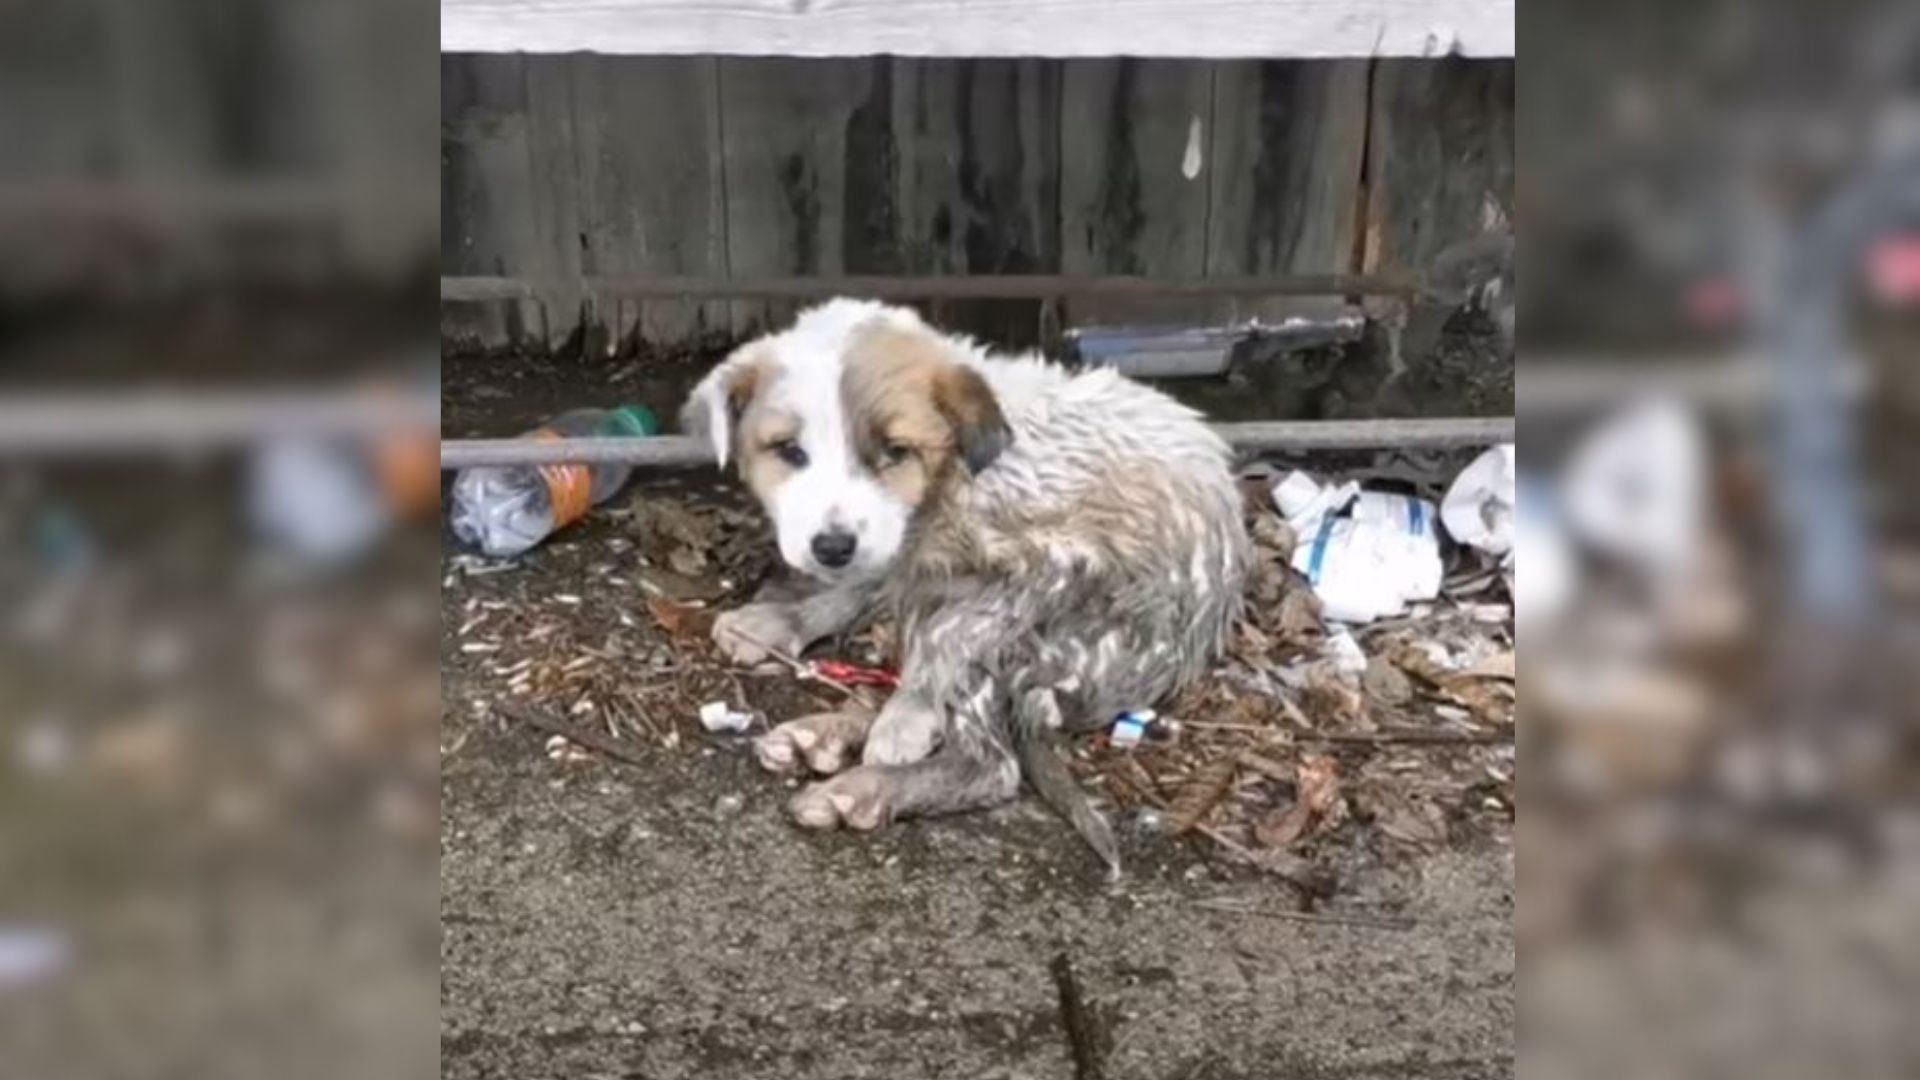 A Pup Abandoned In A Remote Village Finally Gets The Help It Deserves